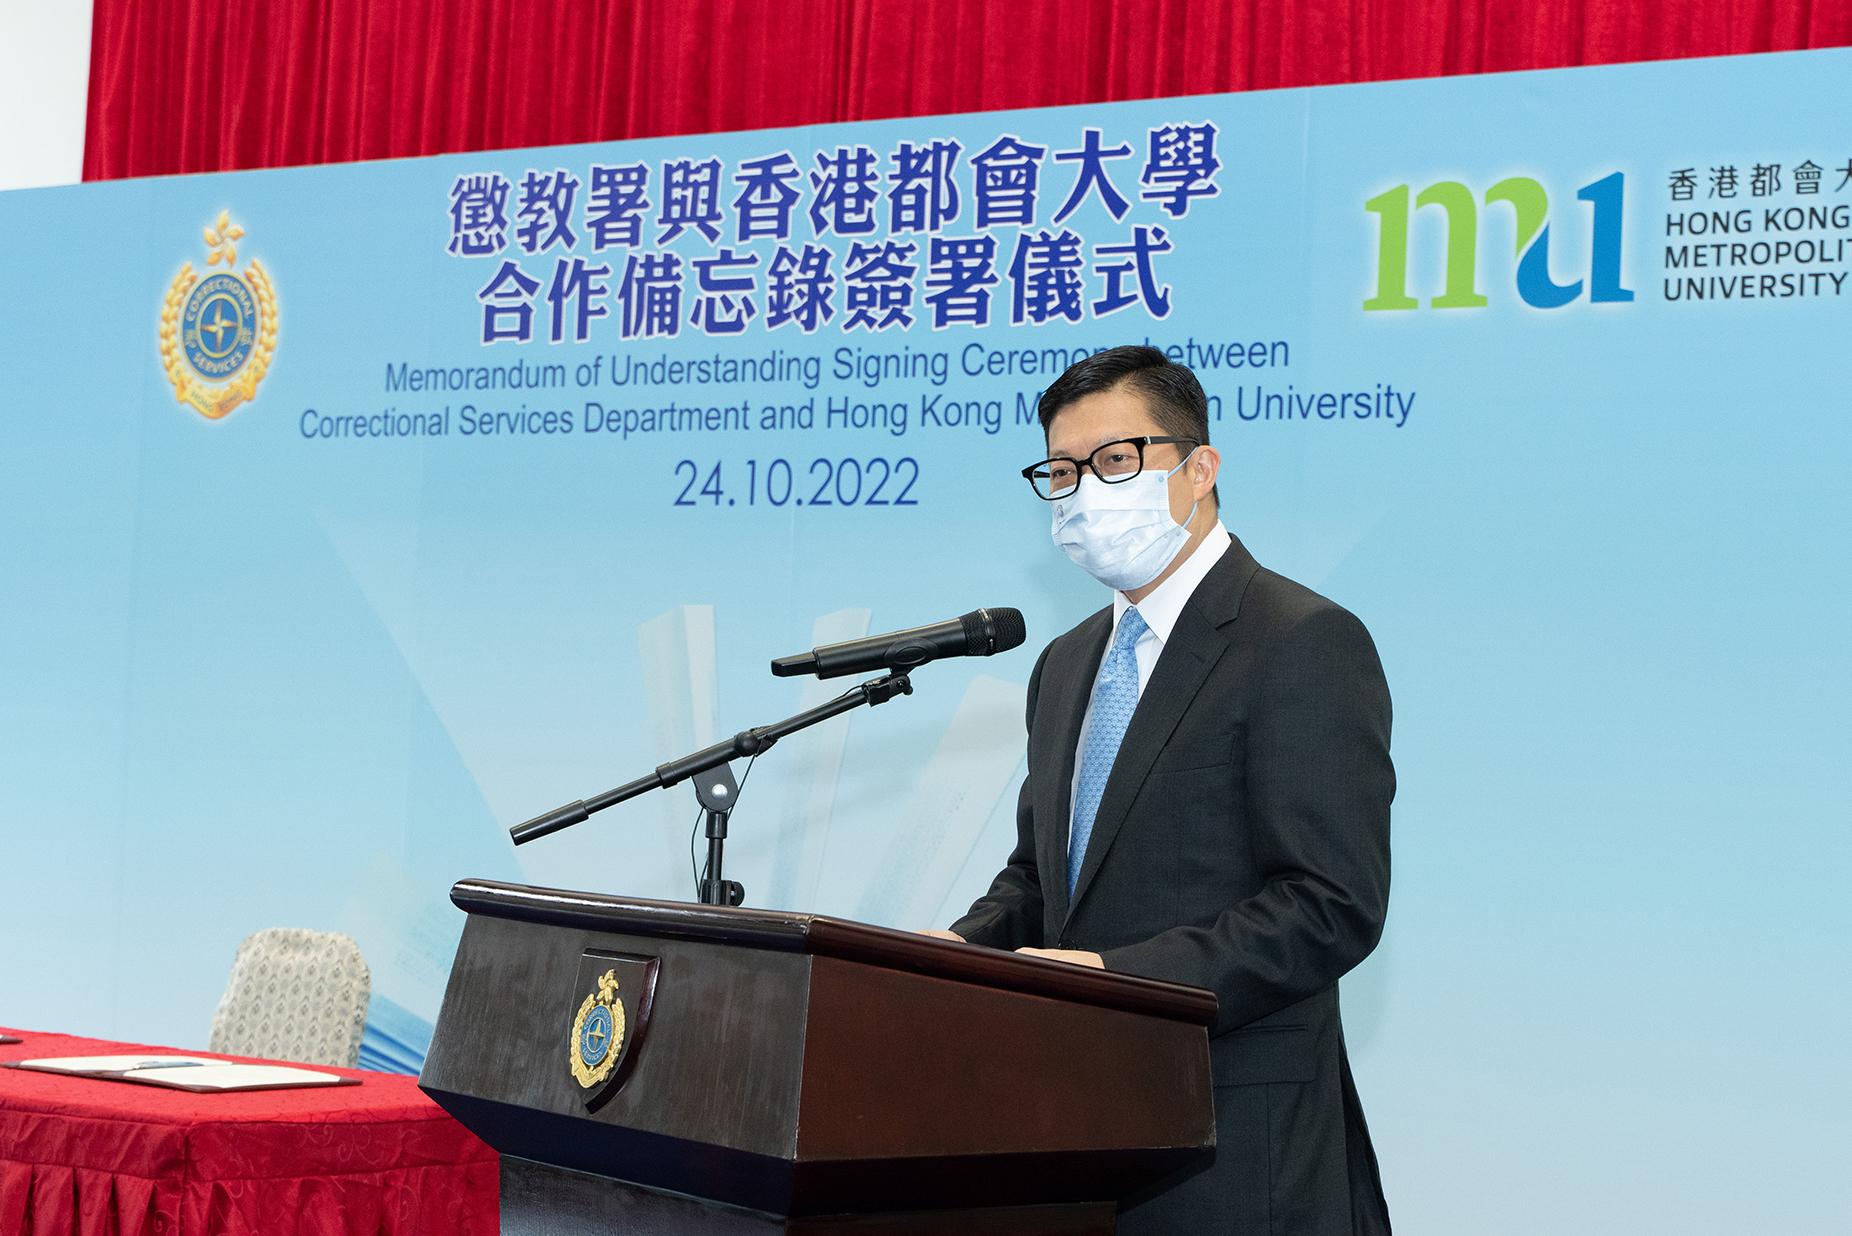 The Correctional Services Department and the Hong Kong Metropolitan University today (October 24) signed a Memorandum of Understanding to strengthen learning support for persons in custody. Photo shows the Secretary for Security, Mr Tang Ping-keung, delivering a speech at the signing ceremony.